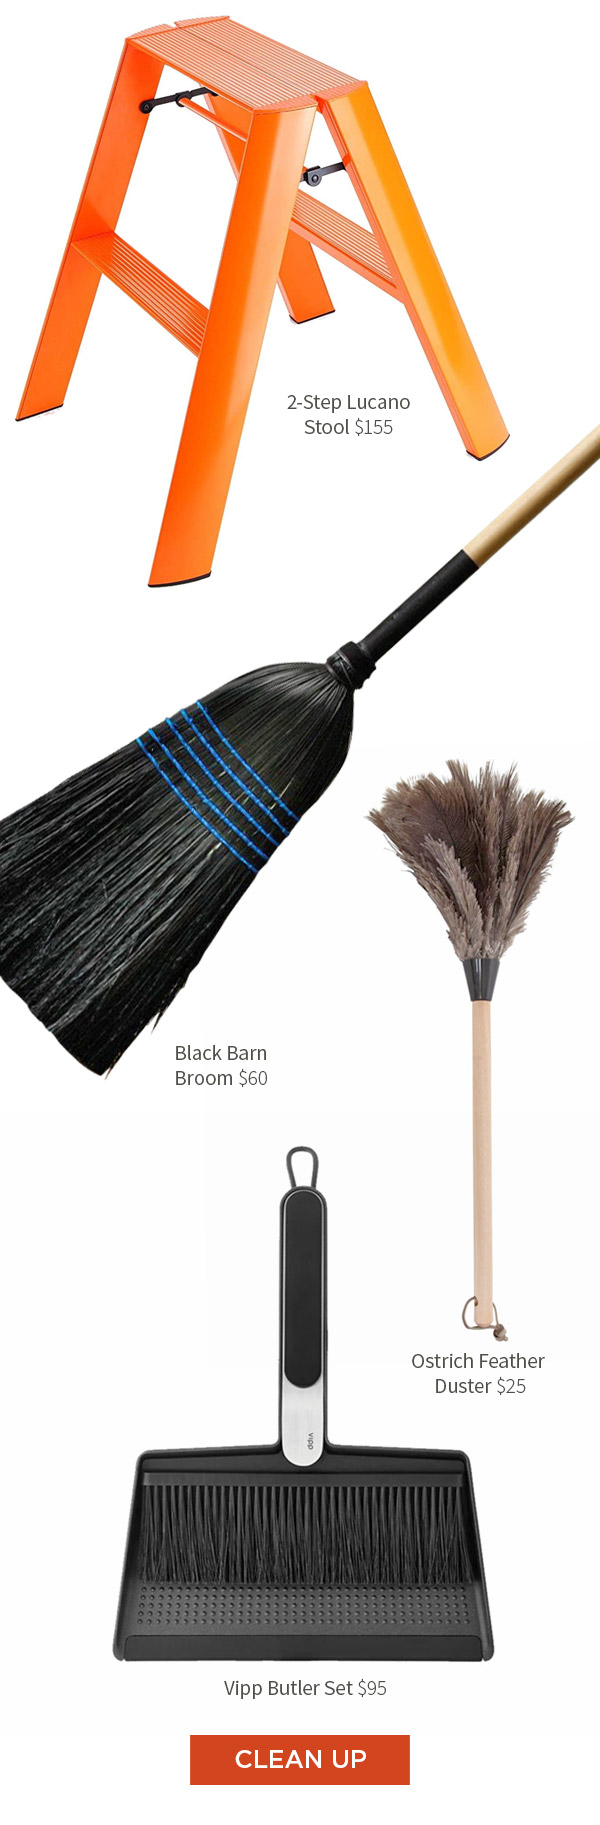 Its Time to Clean Up! We have curated our favorite and most loved house keeping products to make your house a tidy home. Exclusively Hudson Grace. Essential Kitchen Brush Set $42 .?Vipp 4-Gallon Pedal Bin $380